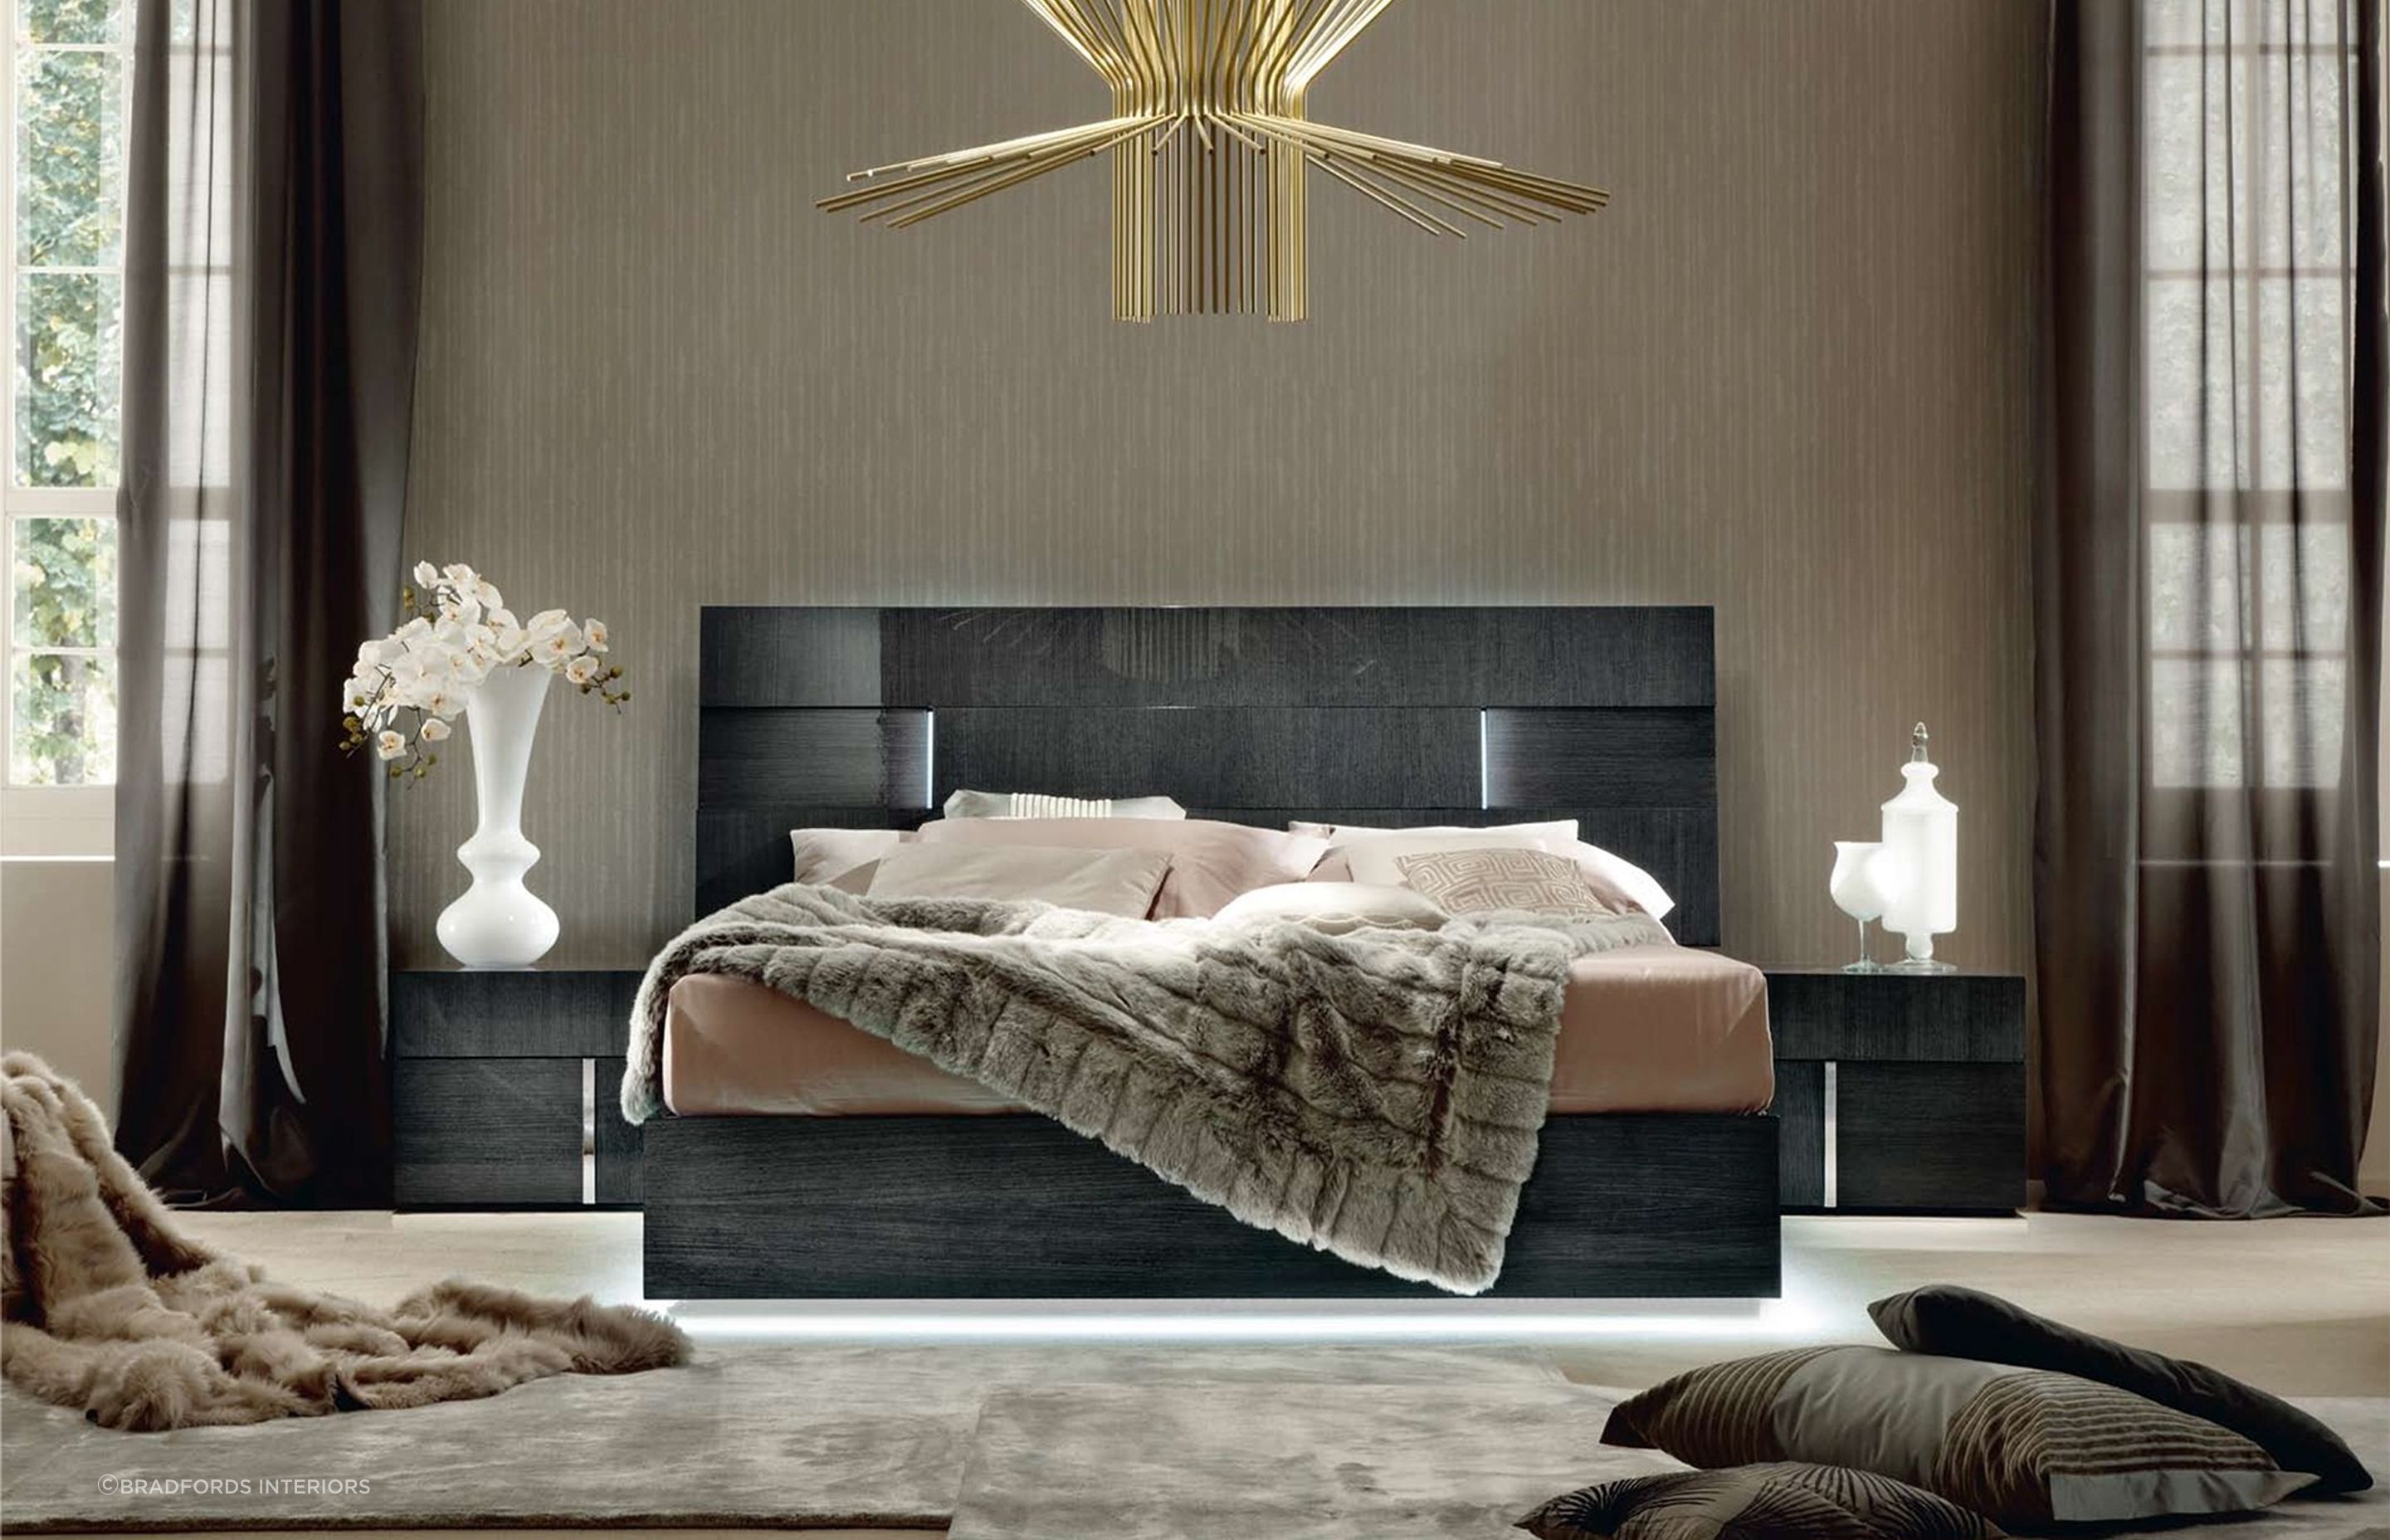 Vibrant lighting brings this bedroom to life with the Montecarlo Bedroom Range by ALF Italia.